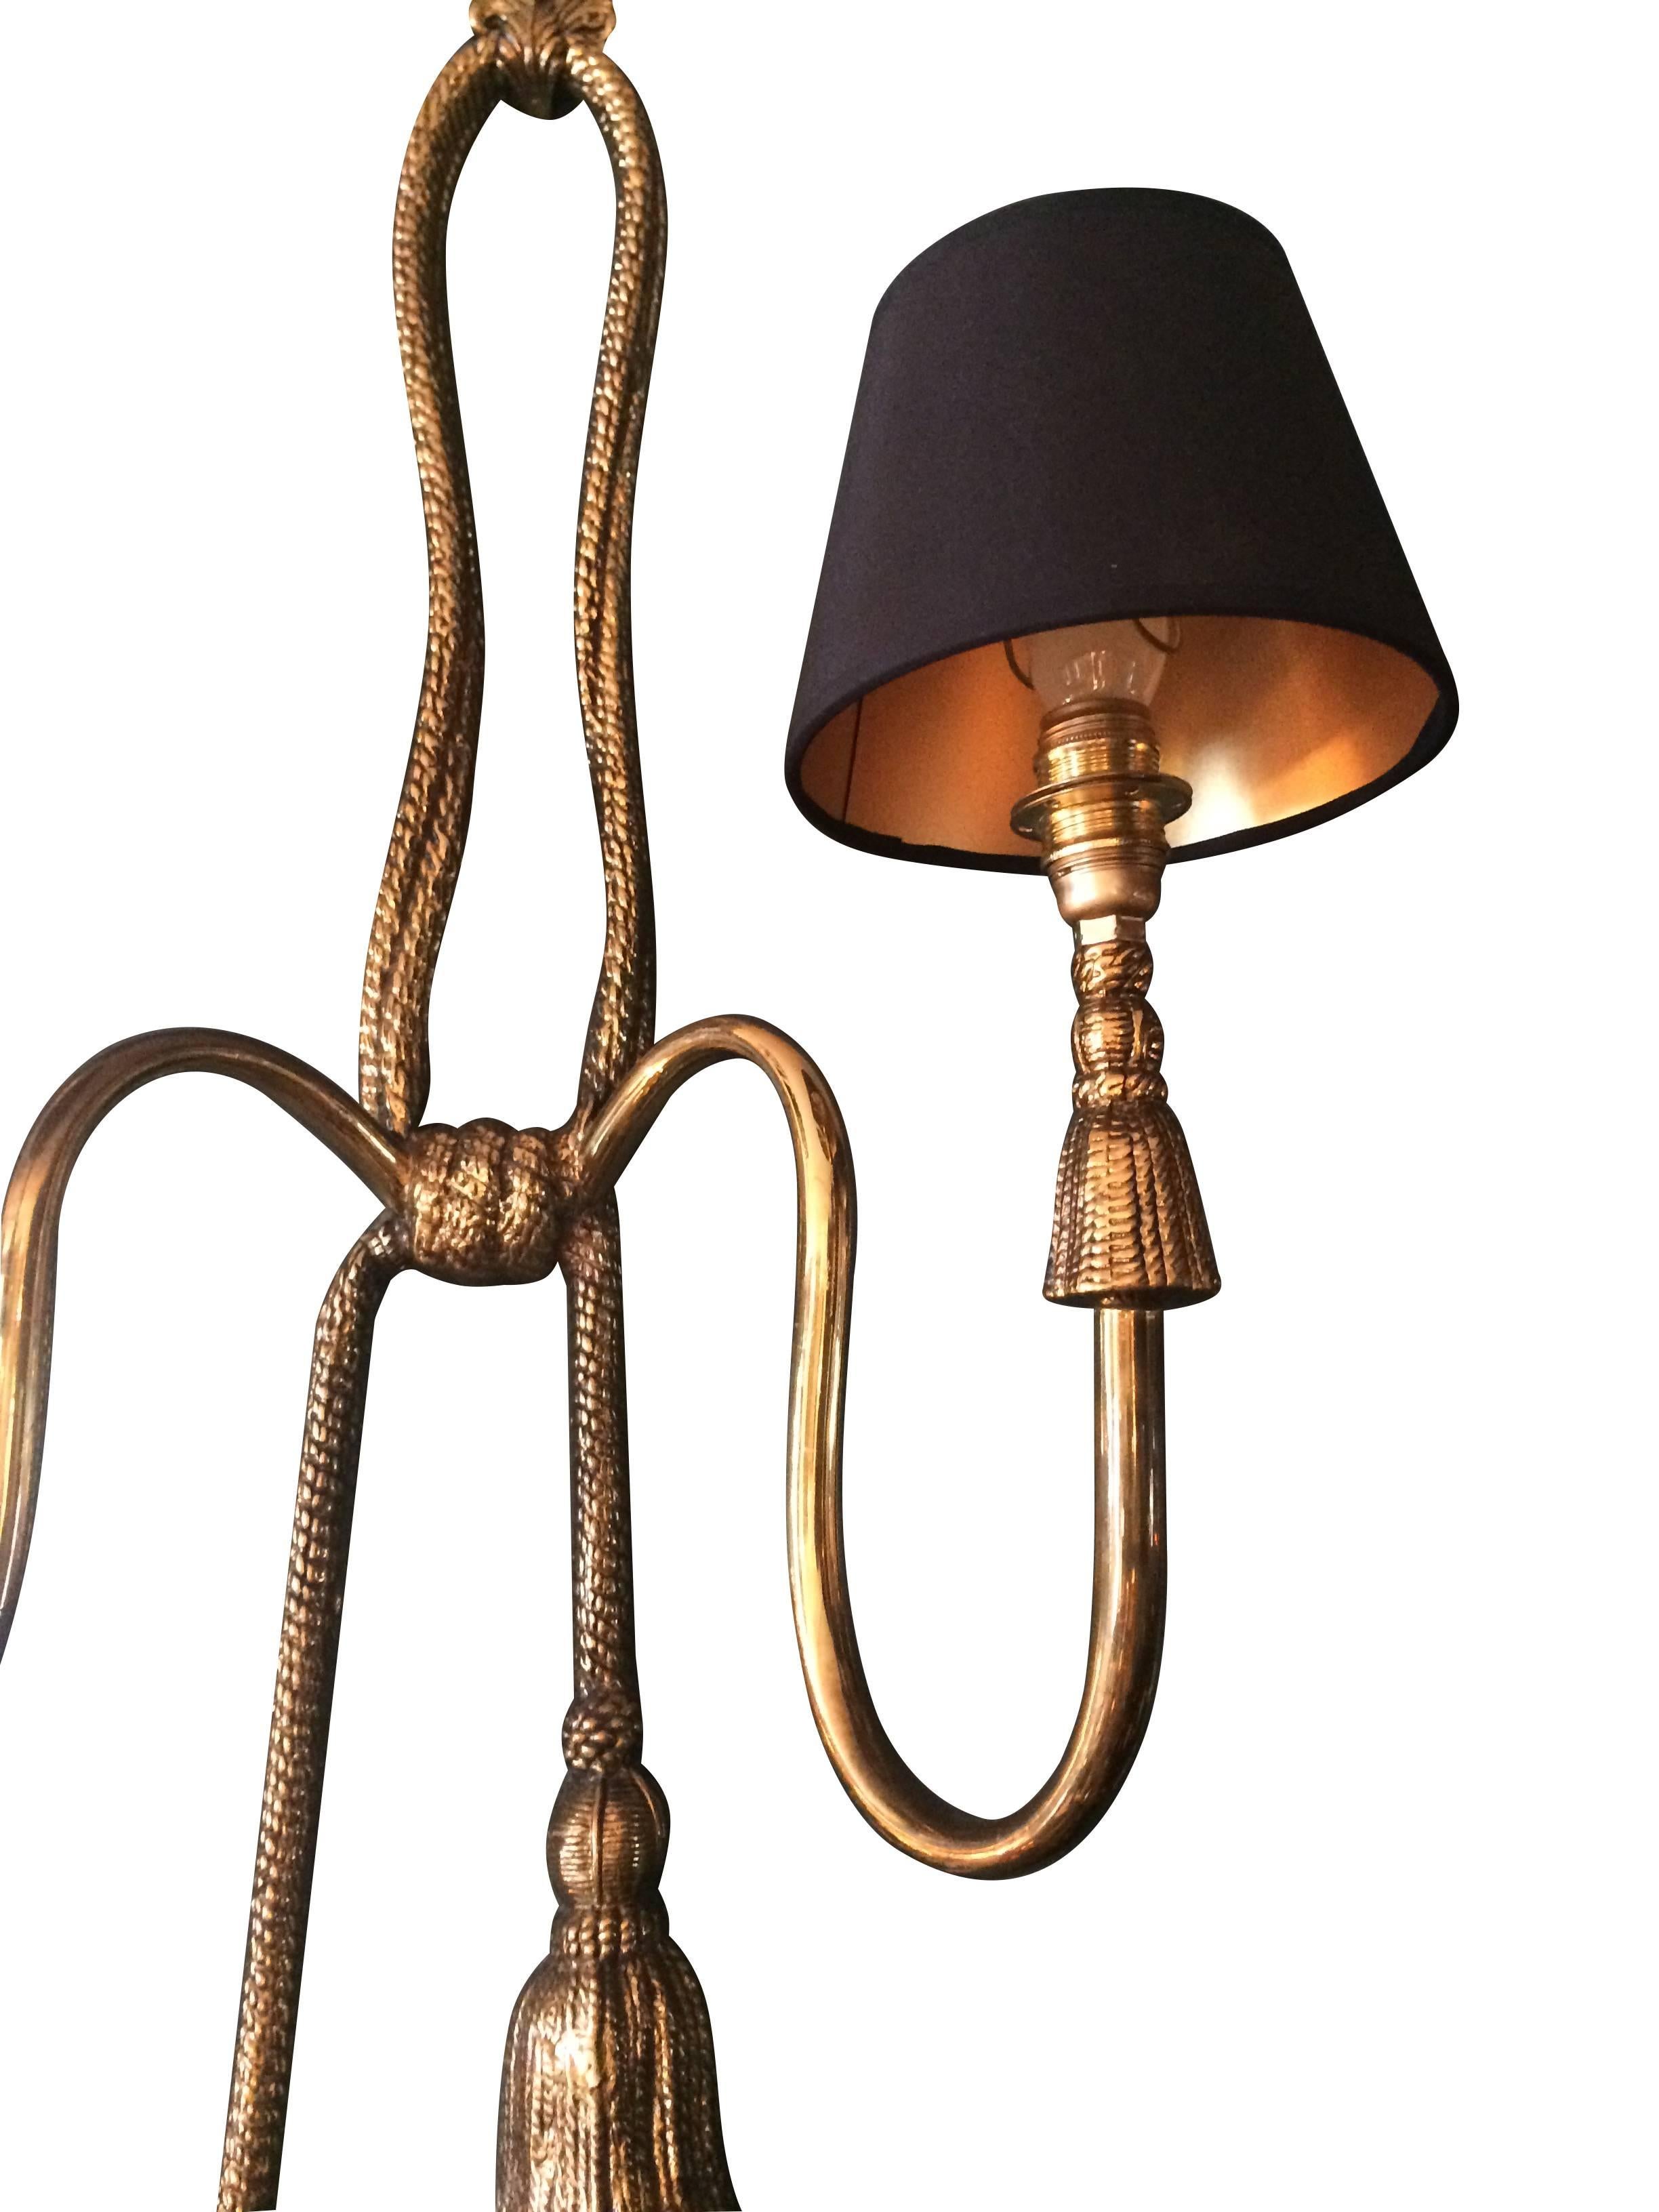 Mid-20th Century Pair of Large Valenti Brass Rope and Tassle Wall Lights